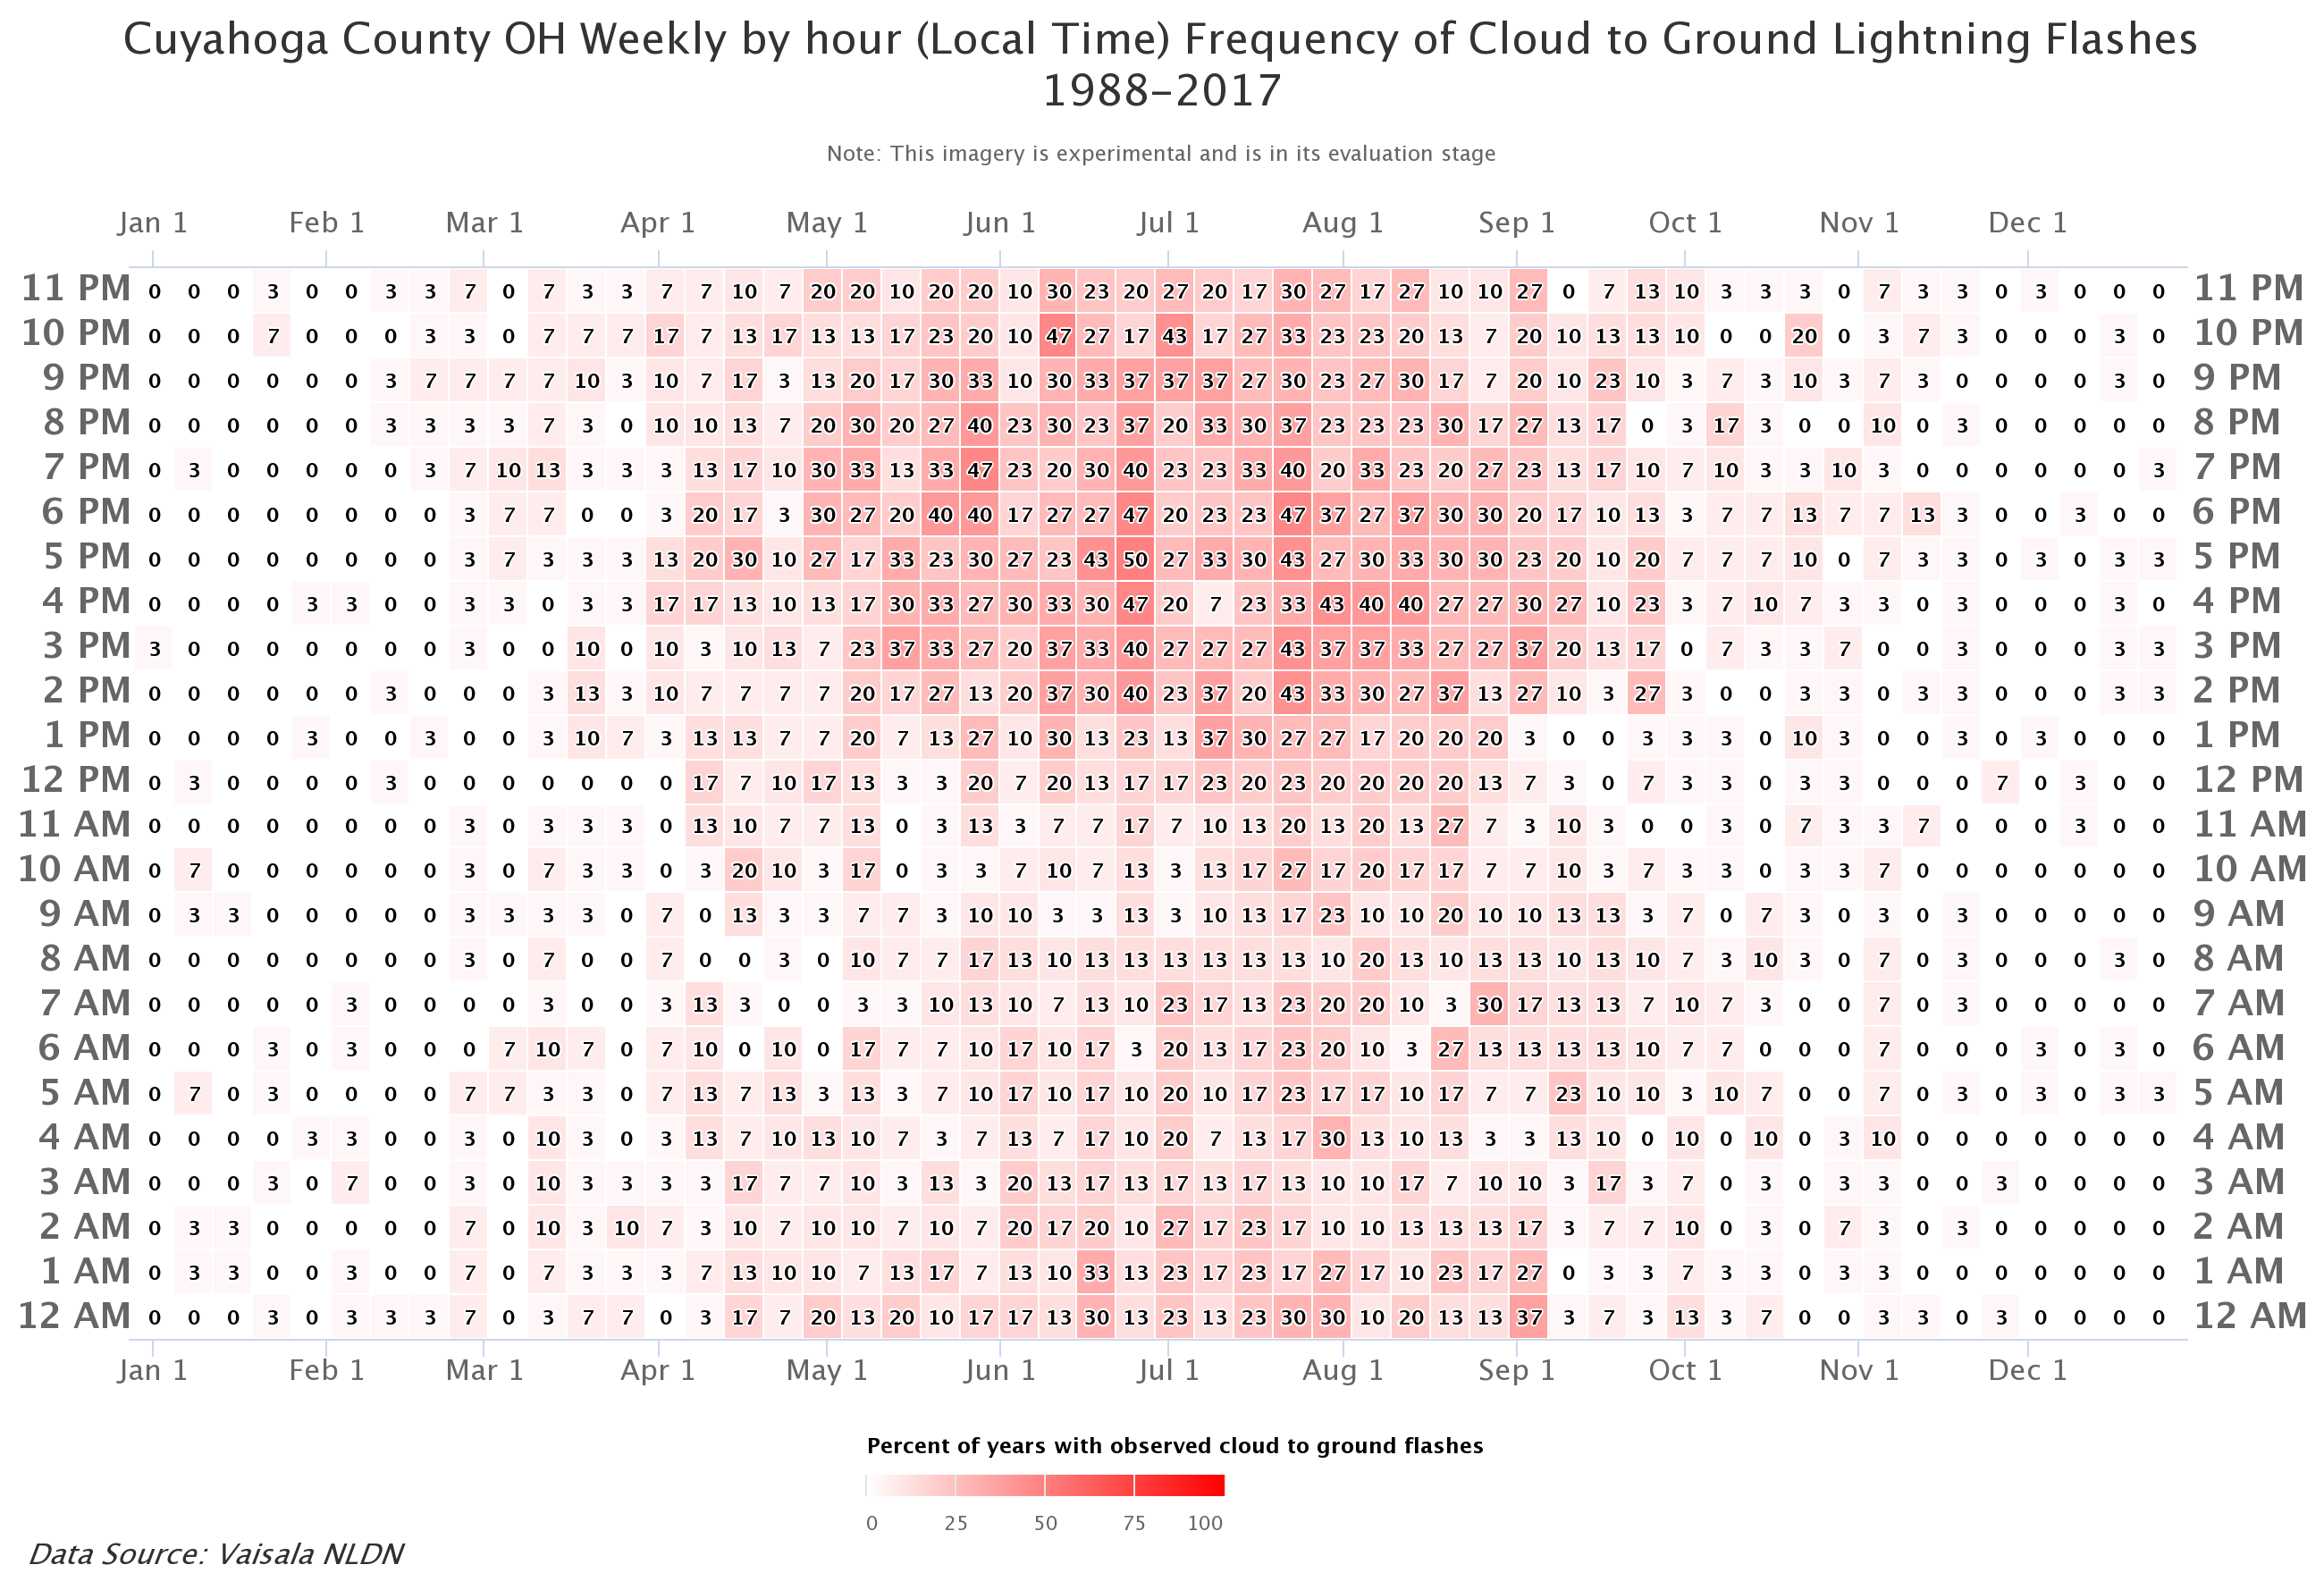 Cuyahoga County Weekly by hour Frequency of flashes - Lightning Climatology